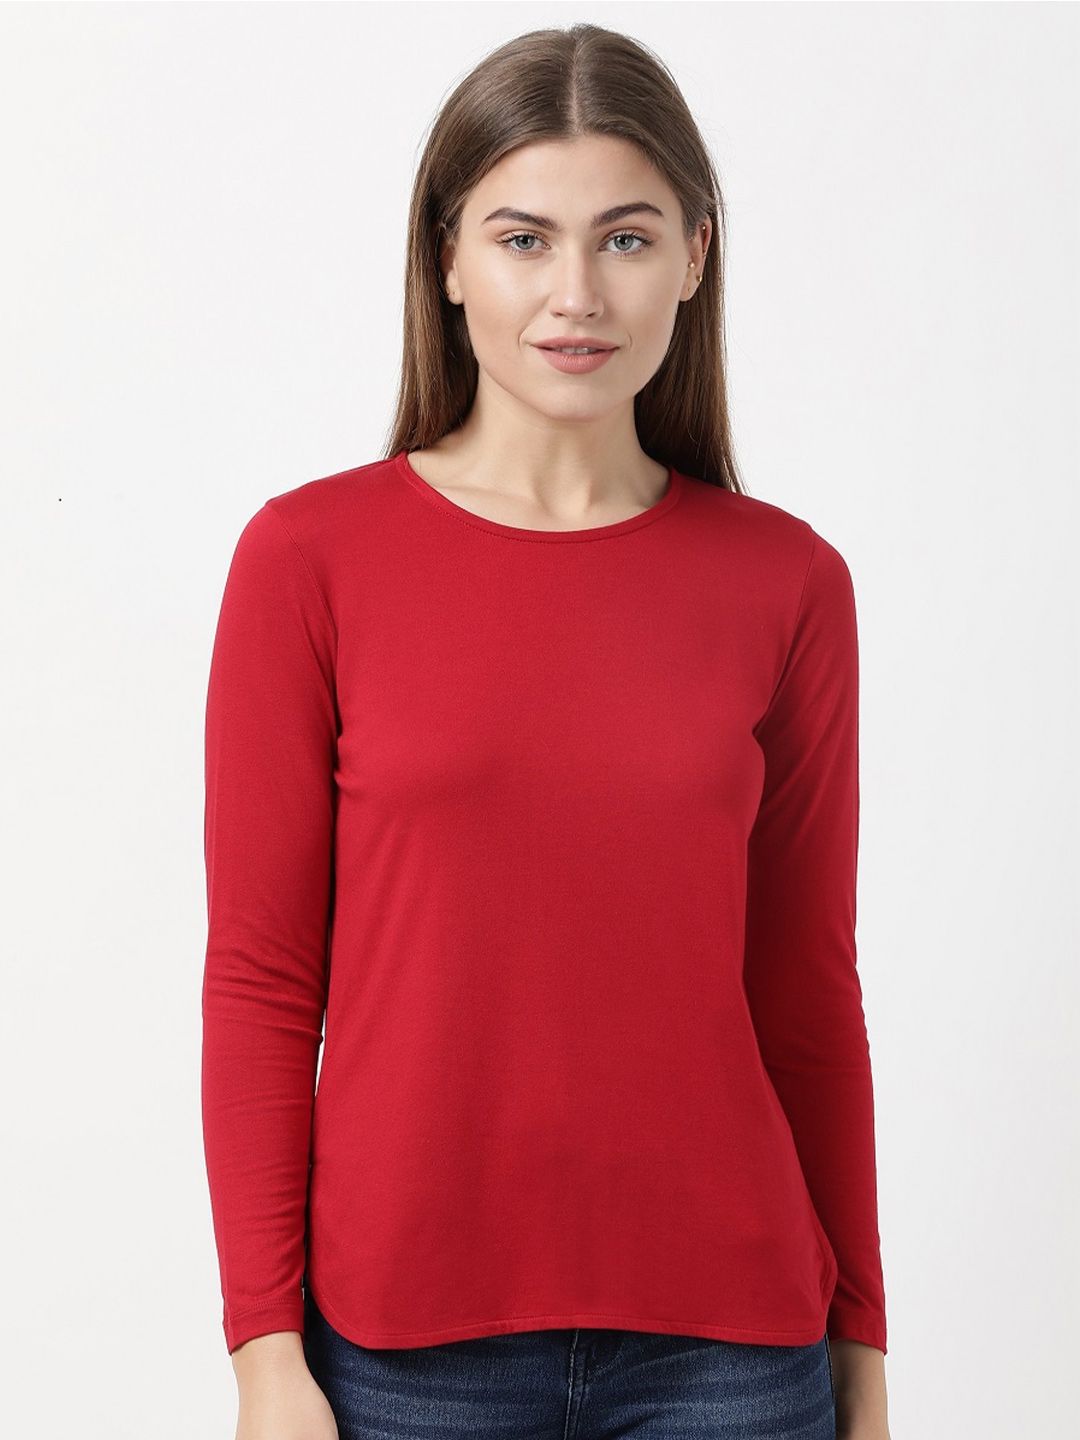 Jockey Women Red Solid Lounge T-shirt Price in India